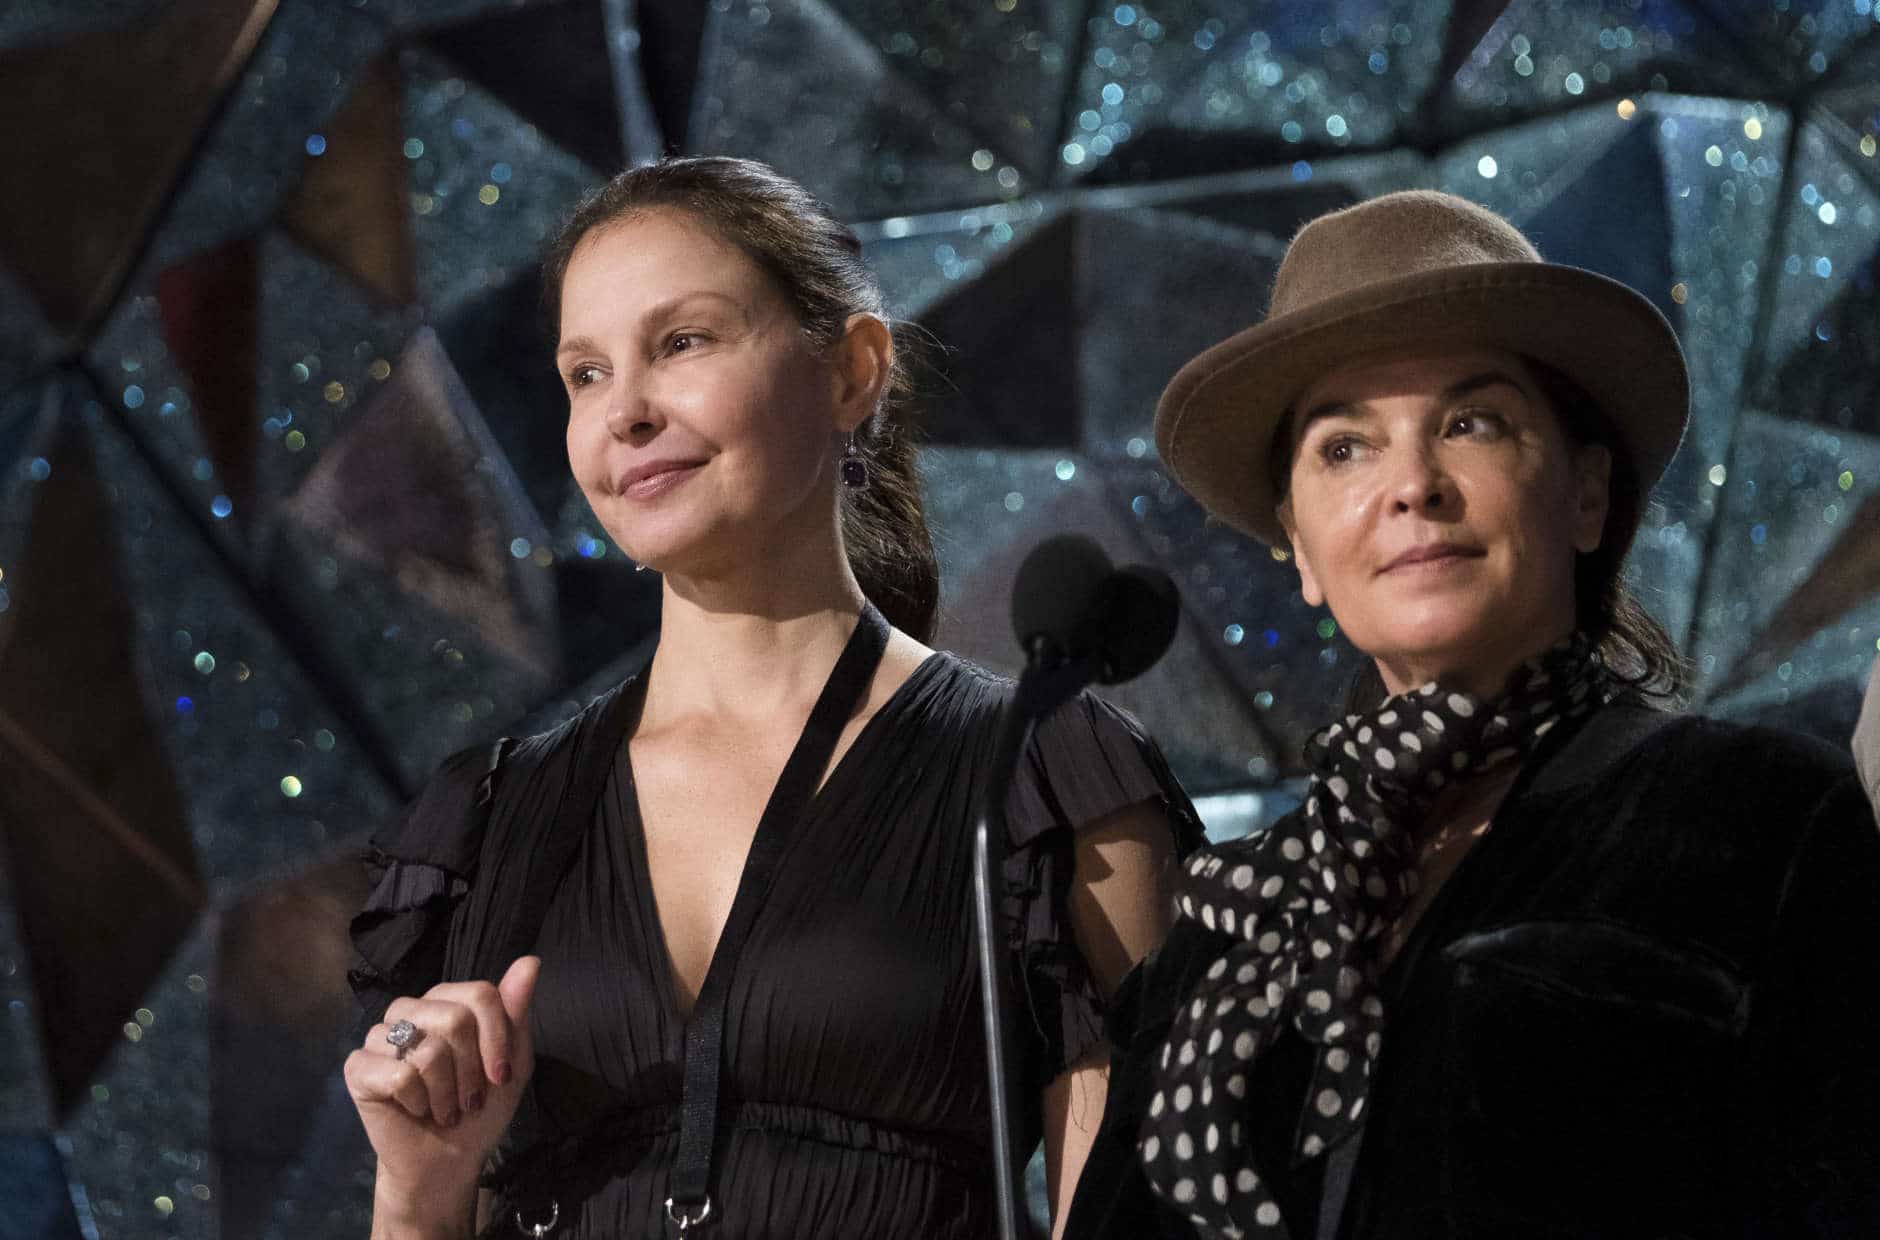 Ashley Judd, left, and Annabella Sciorra appear during rehearsals for the 90th Academy Awards in Los Angeles on Saturday, March 3, 2018. The Academy Awards will be held at the Dolby Theatre on Sunday, March 4. (Photo by Charles Sykes/Invision/AP)